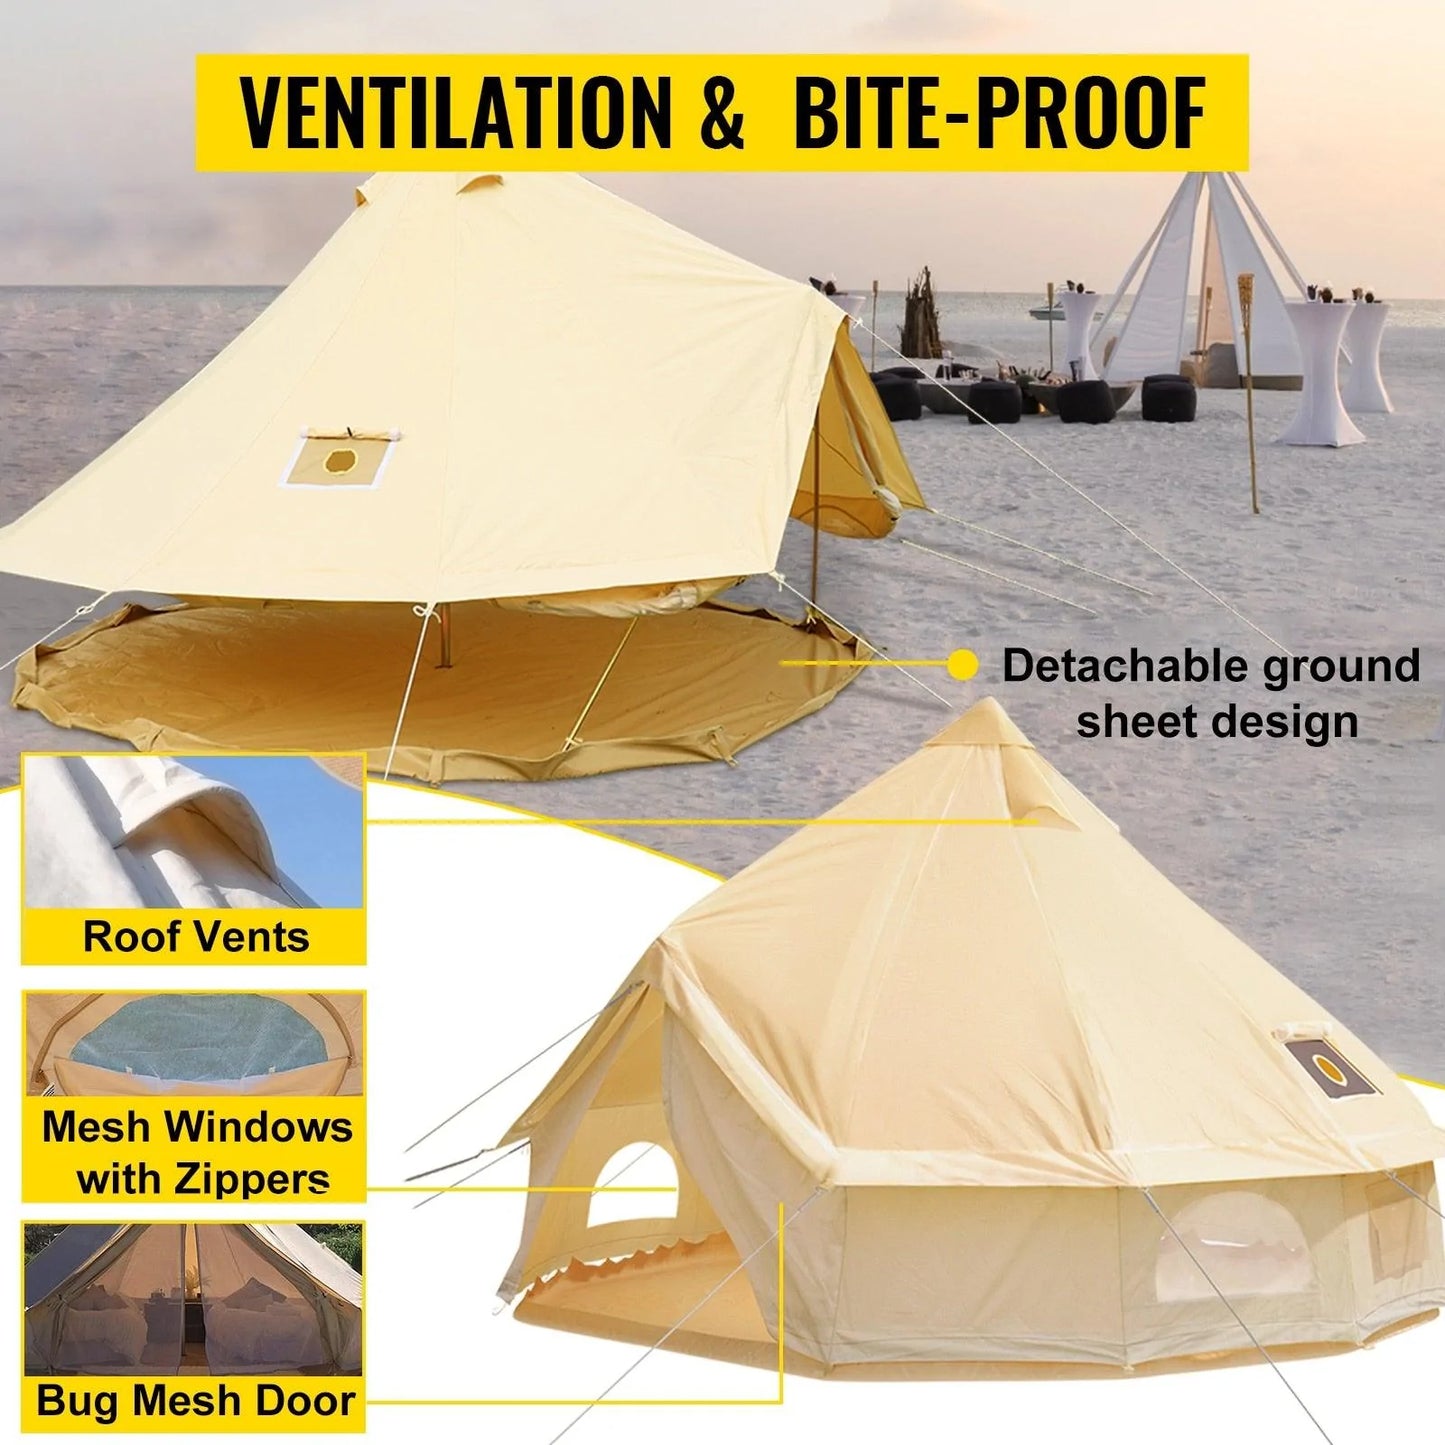 4m Wide Bell Tent - Buy Confidently with Smart Sales Australia